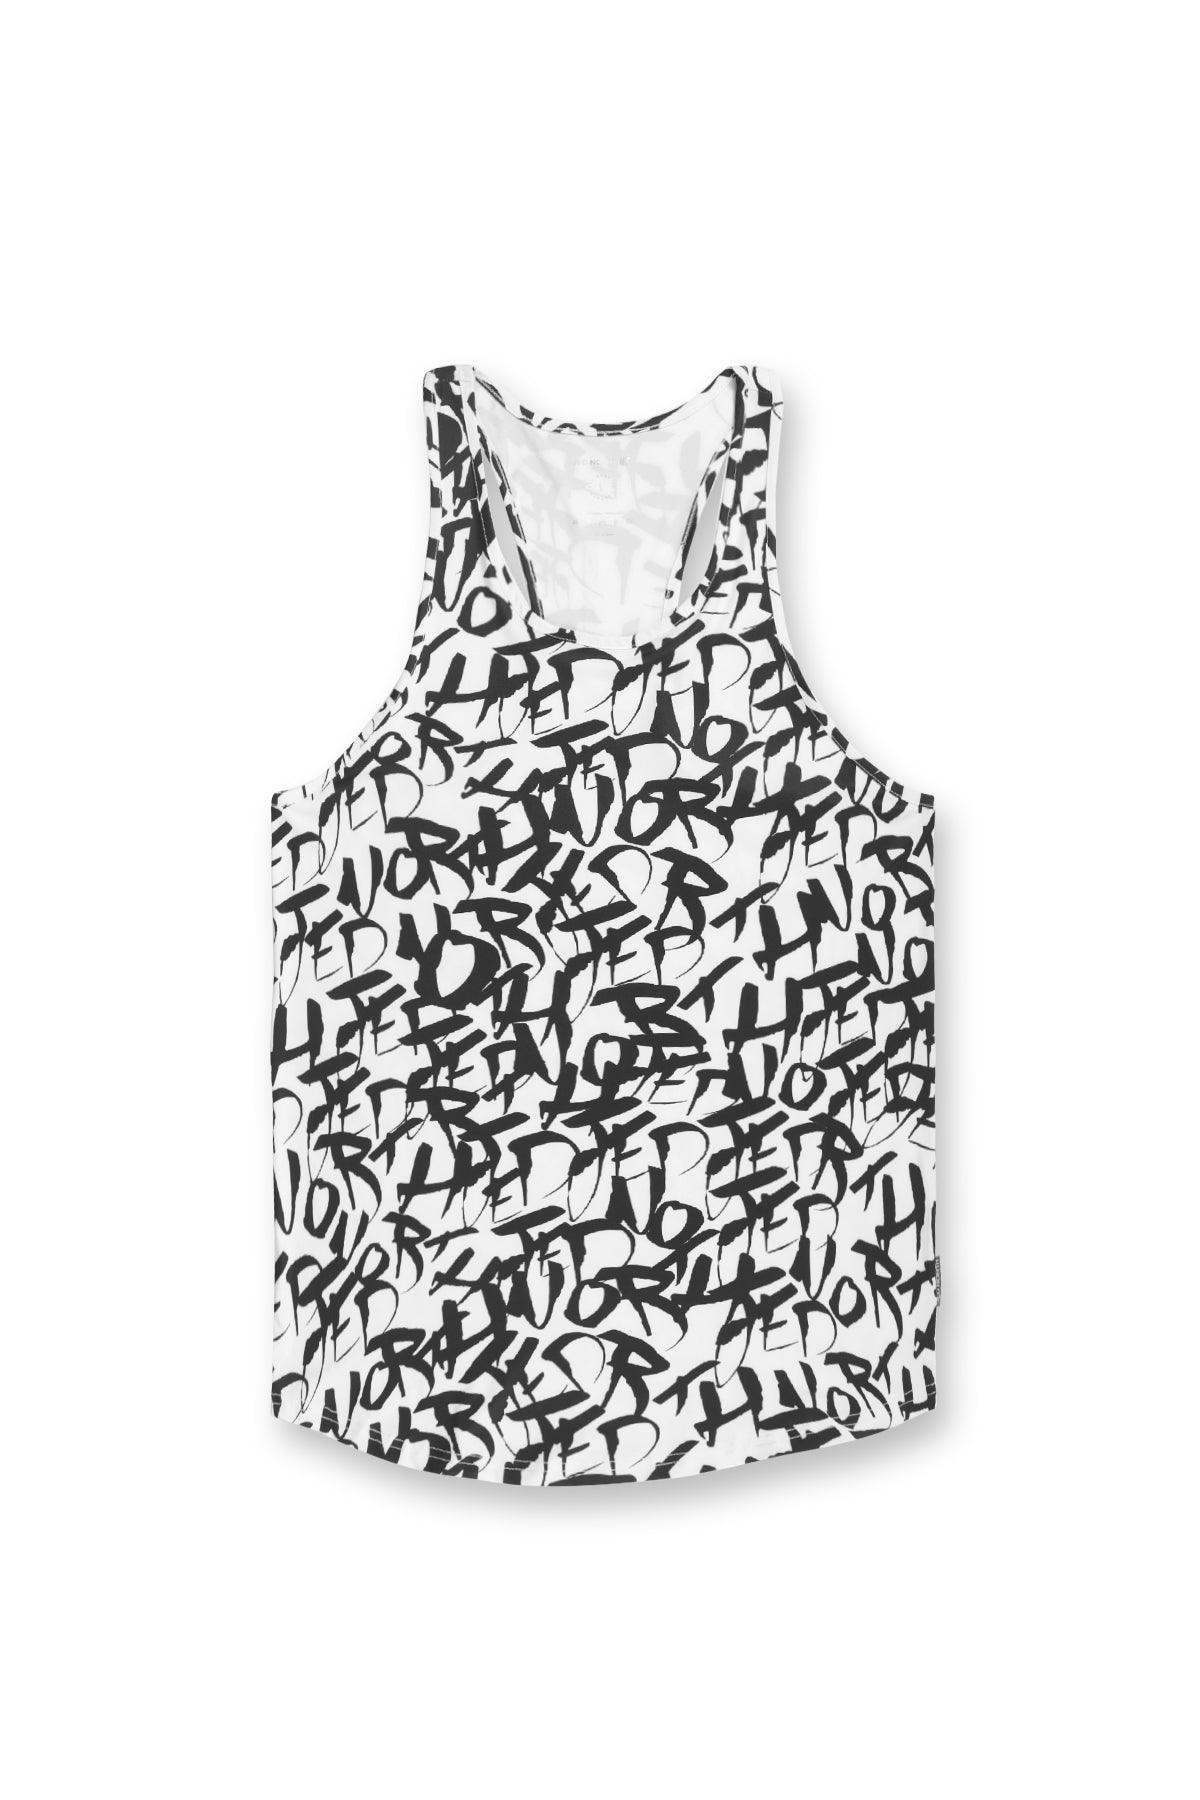 Graphic Muscle Stringer - Chaotic White - Jed North Canada